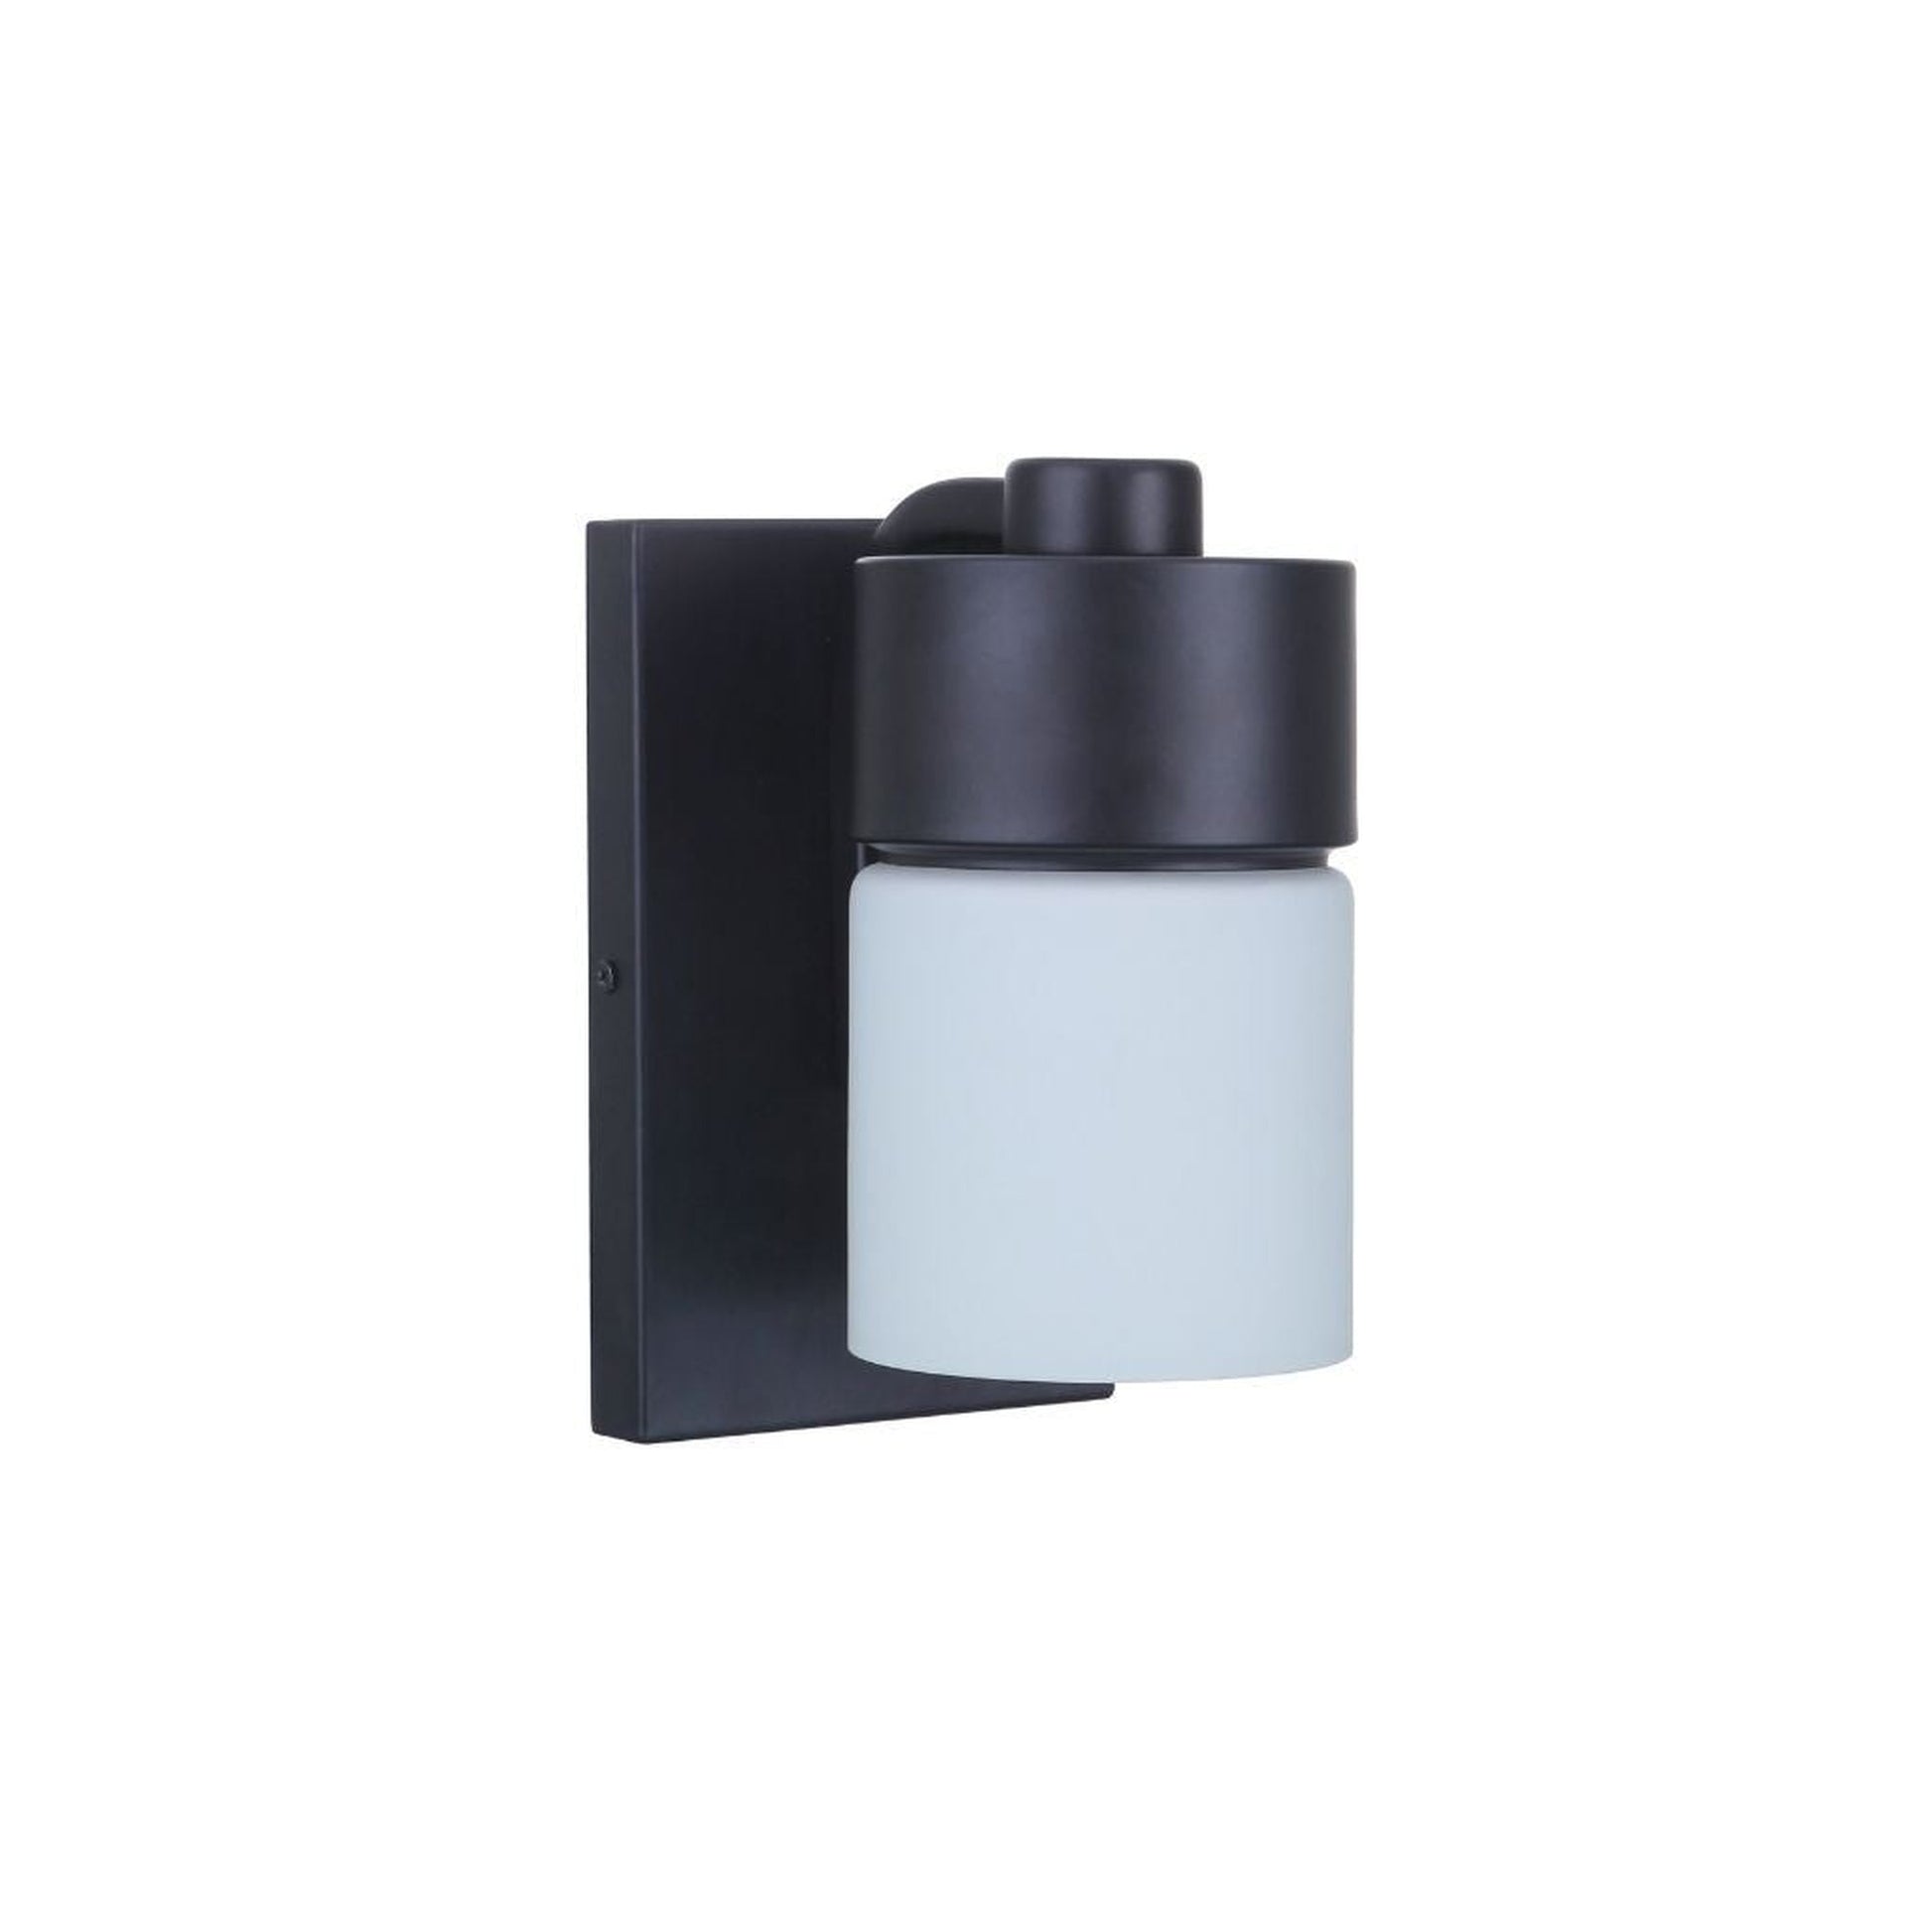 Craftmade District 5" x 8" 1-Light Flat Black Wall Sconce With White Opal Glass Shade